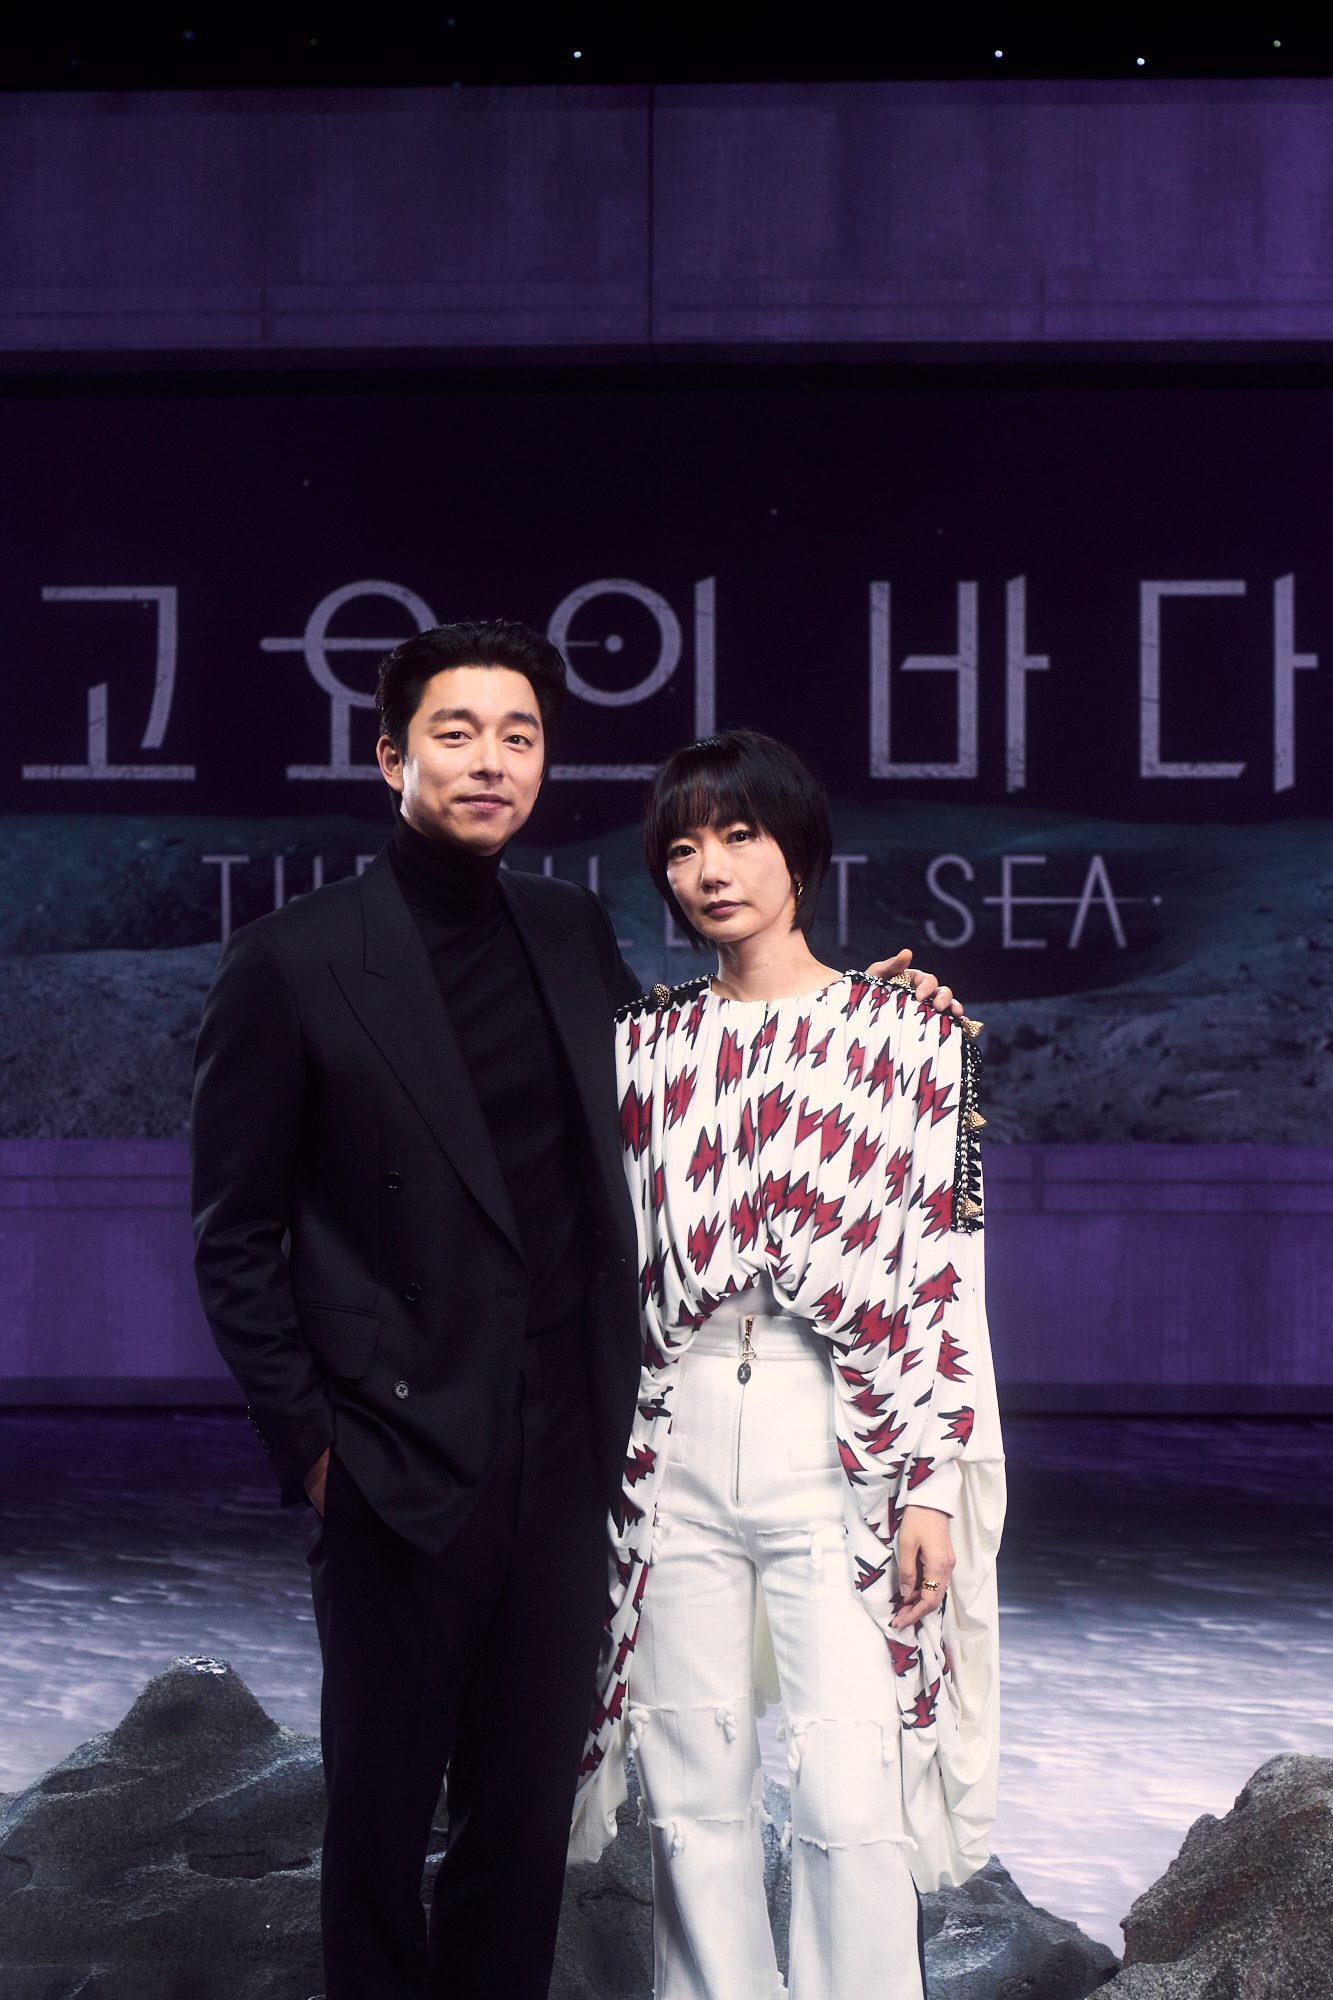 The Silent Sea feat. our lovely Slapper (Gong Yoo) and Doek Su